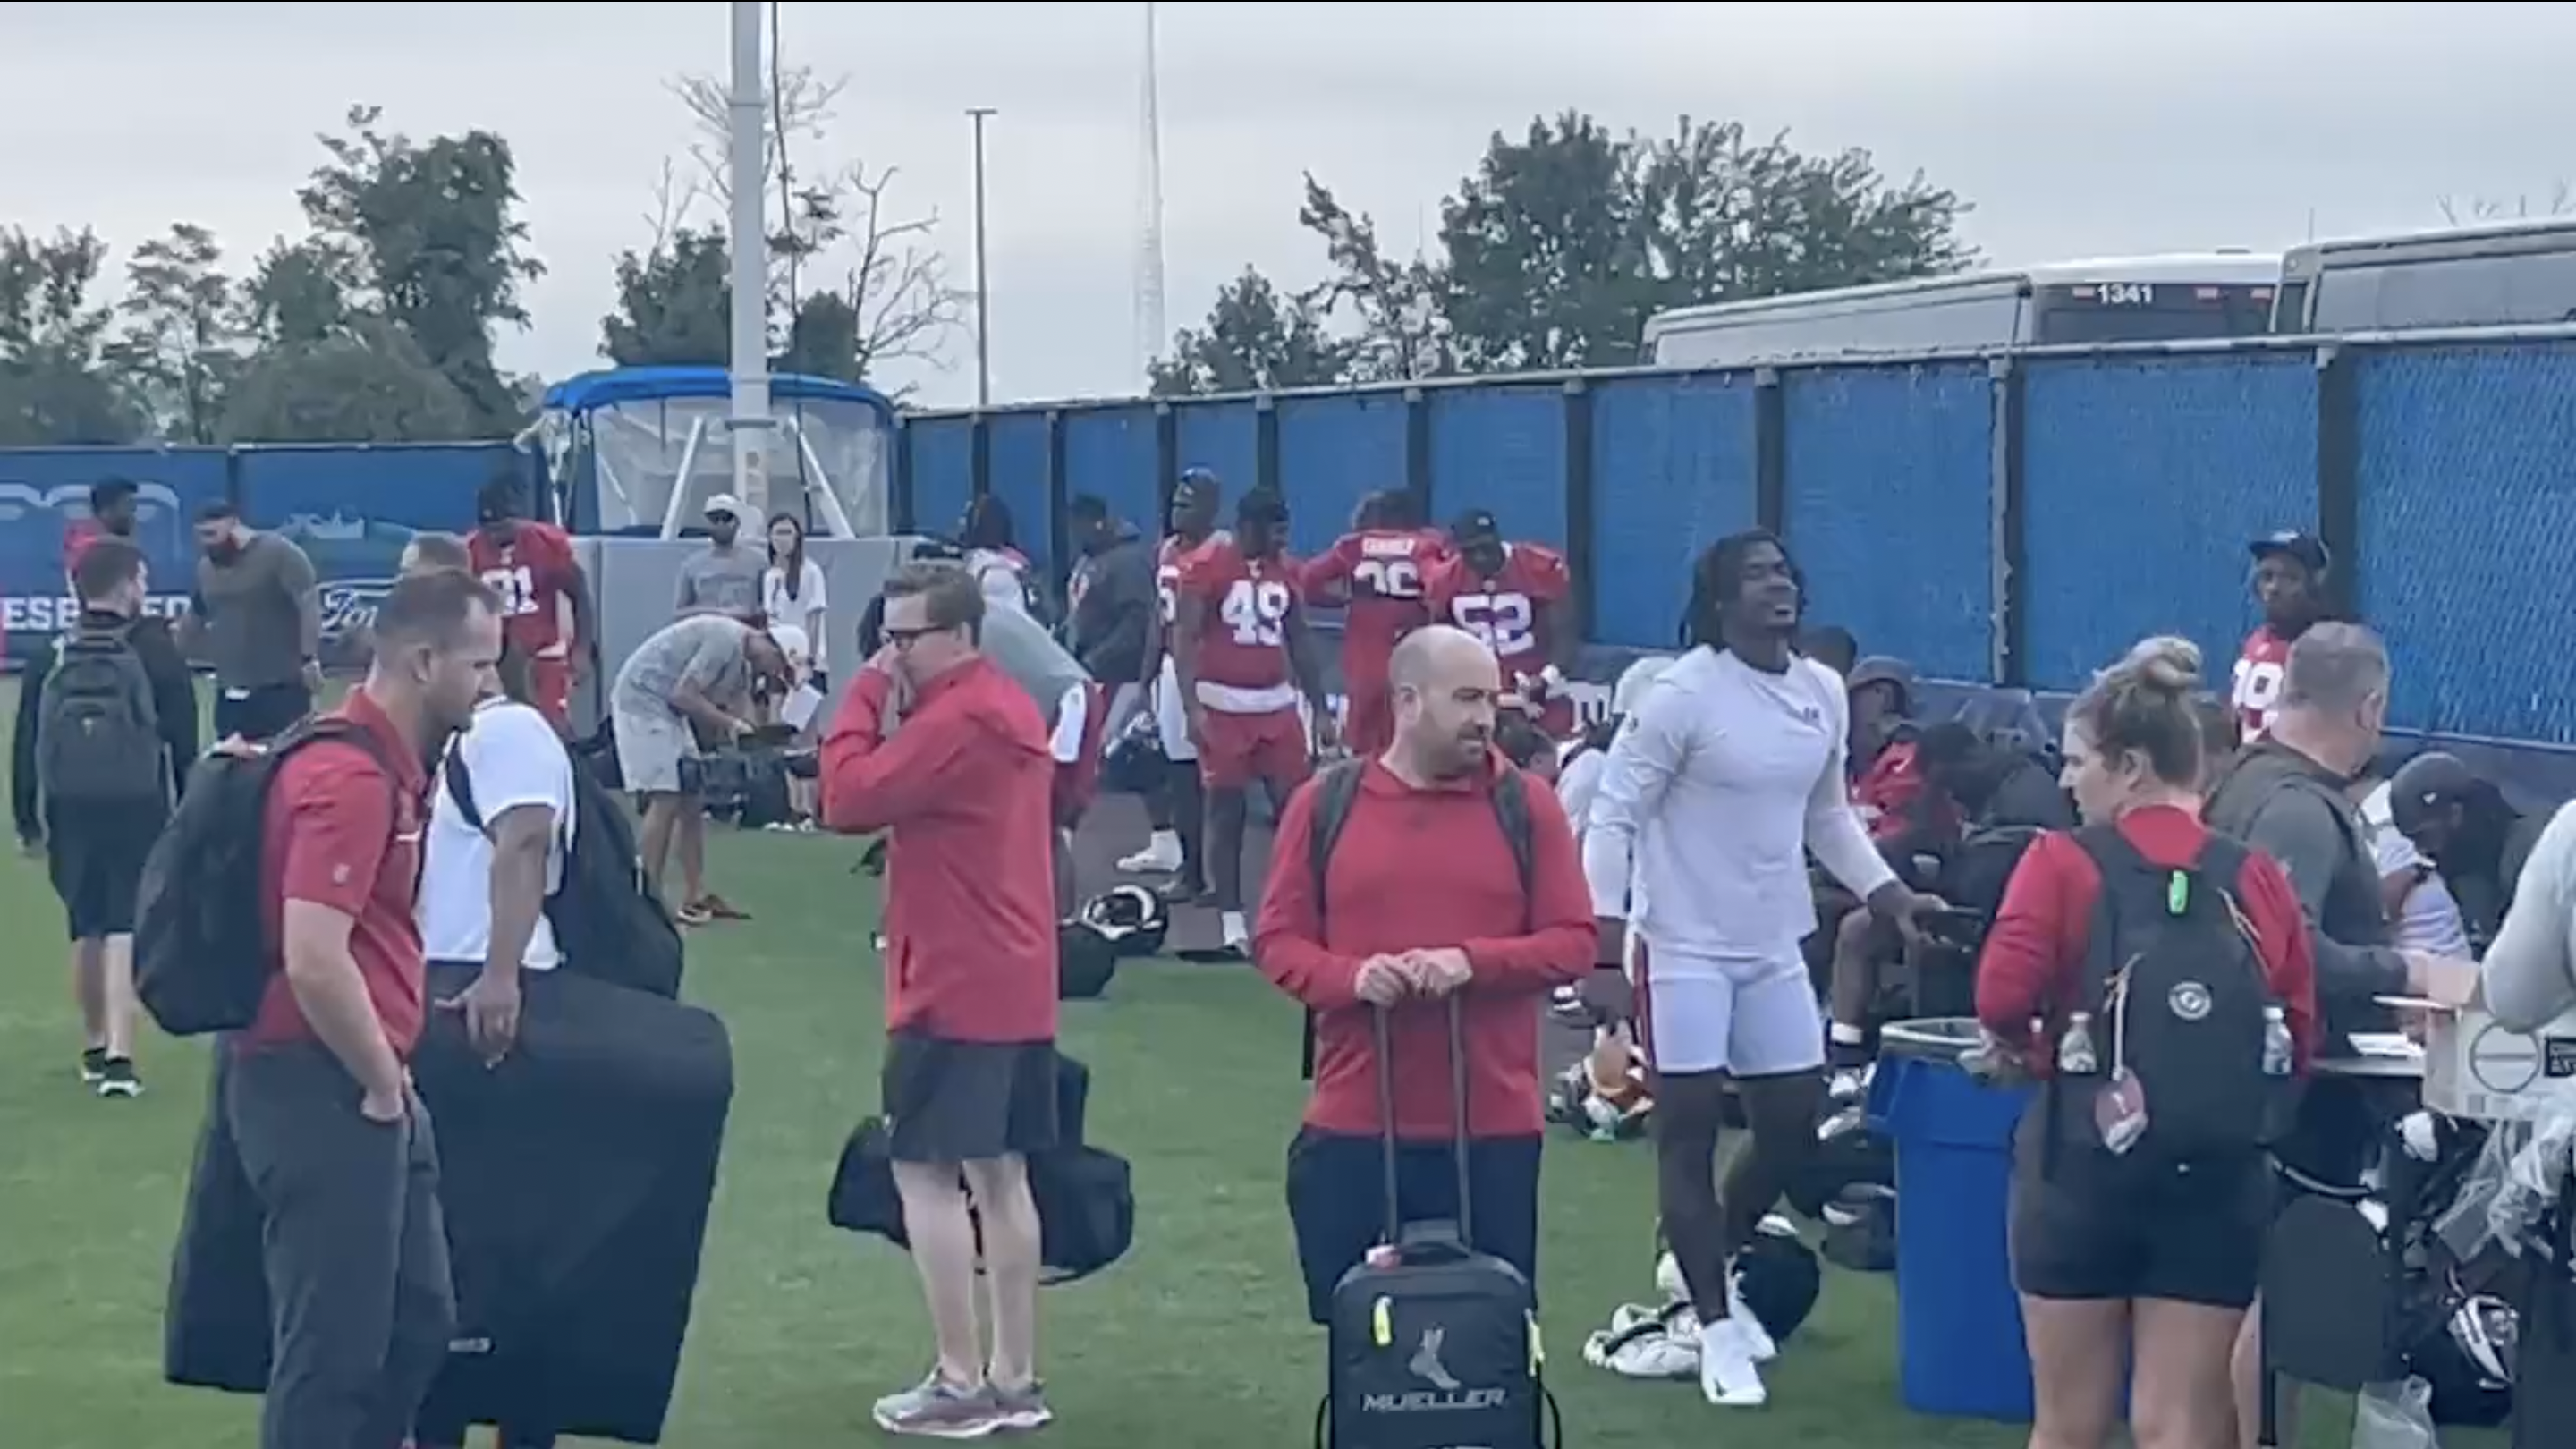 Giants allow stranded Tampa Bay Bucs to use practice facility